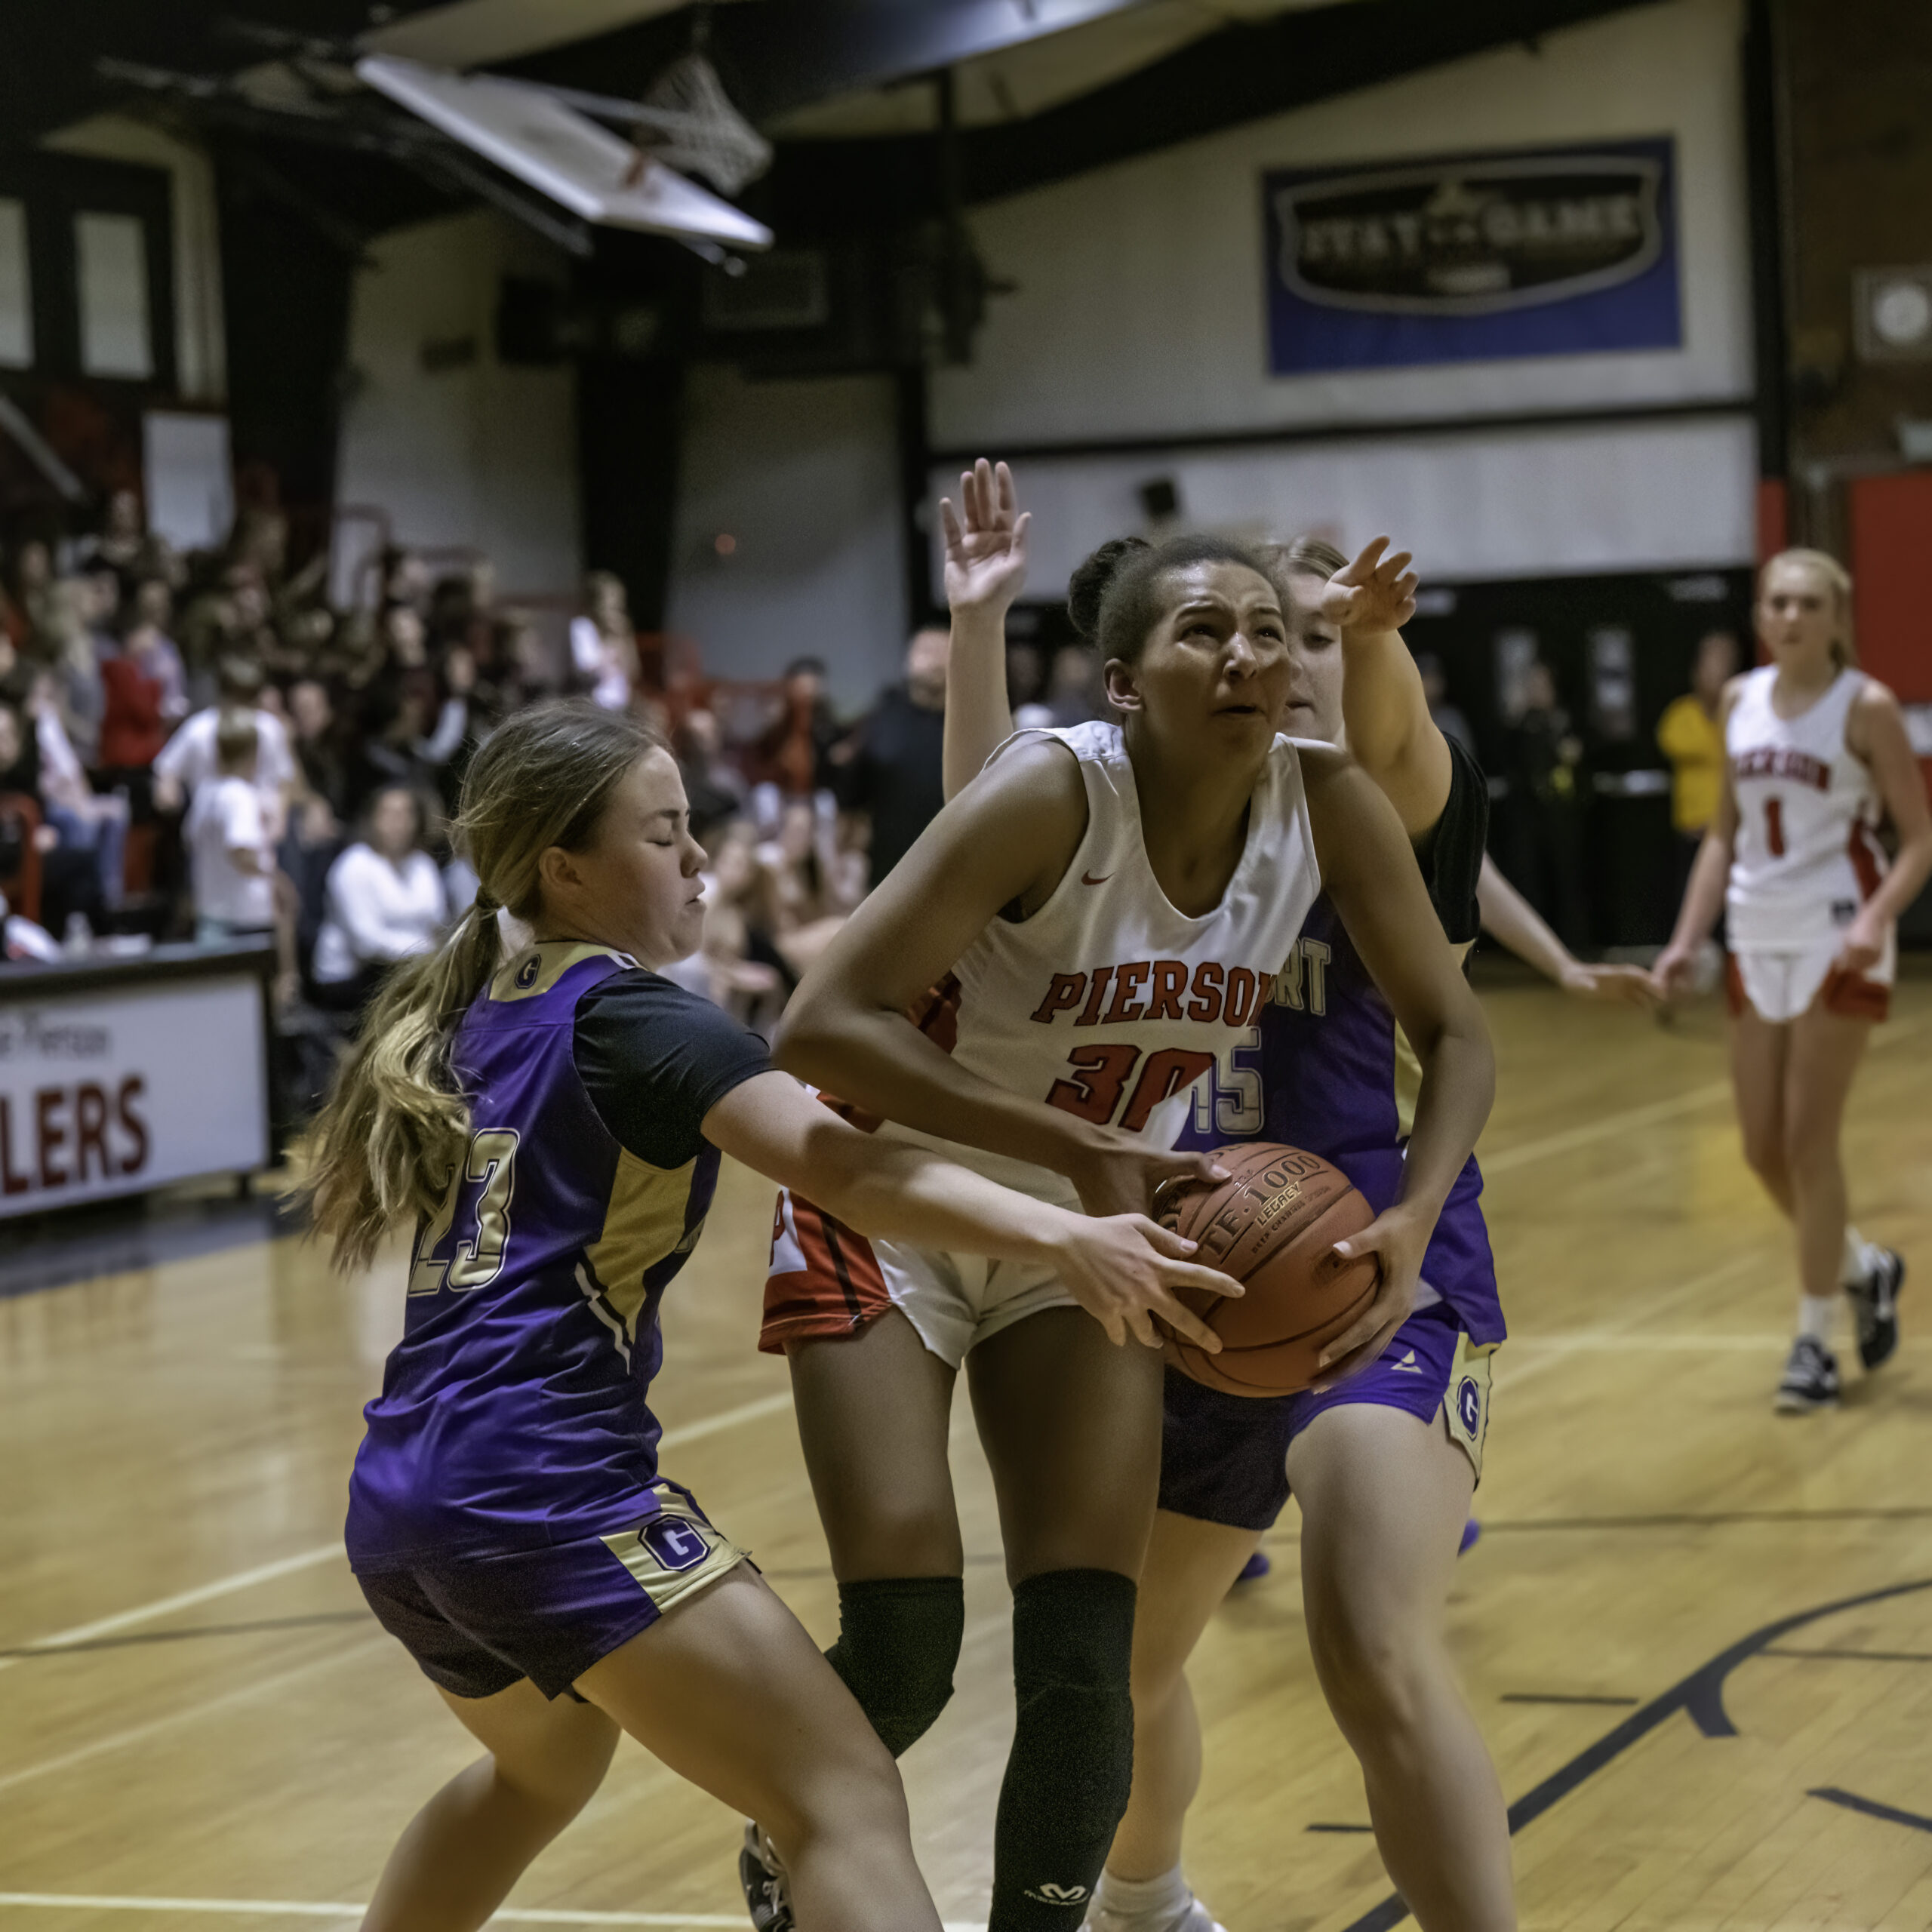 Pierson's Lyra Aubry, surrounded by a pair of Greenport/Southold players, tries to go up for two points.   MARIANNE BARNETT